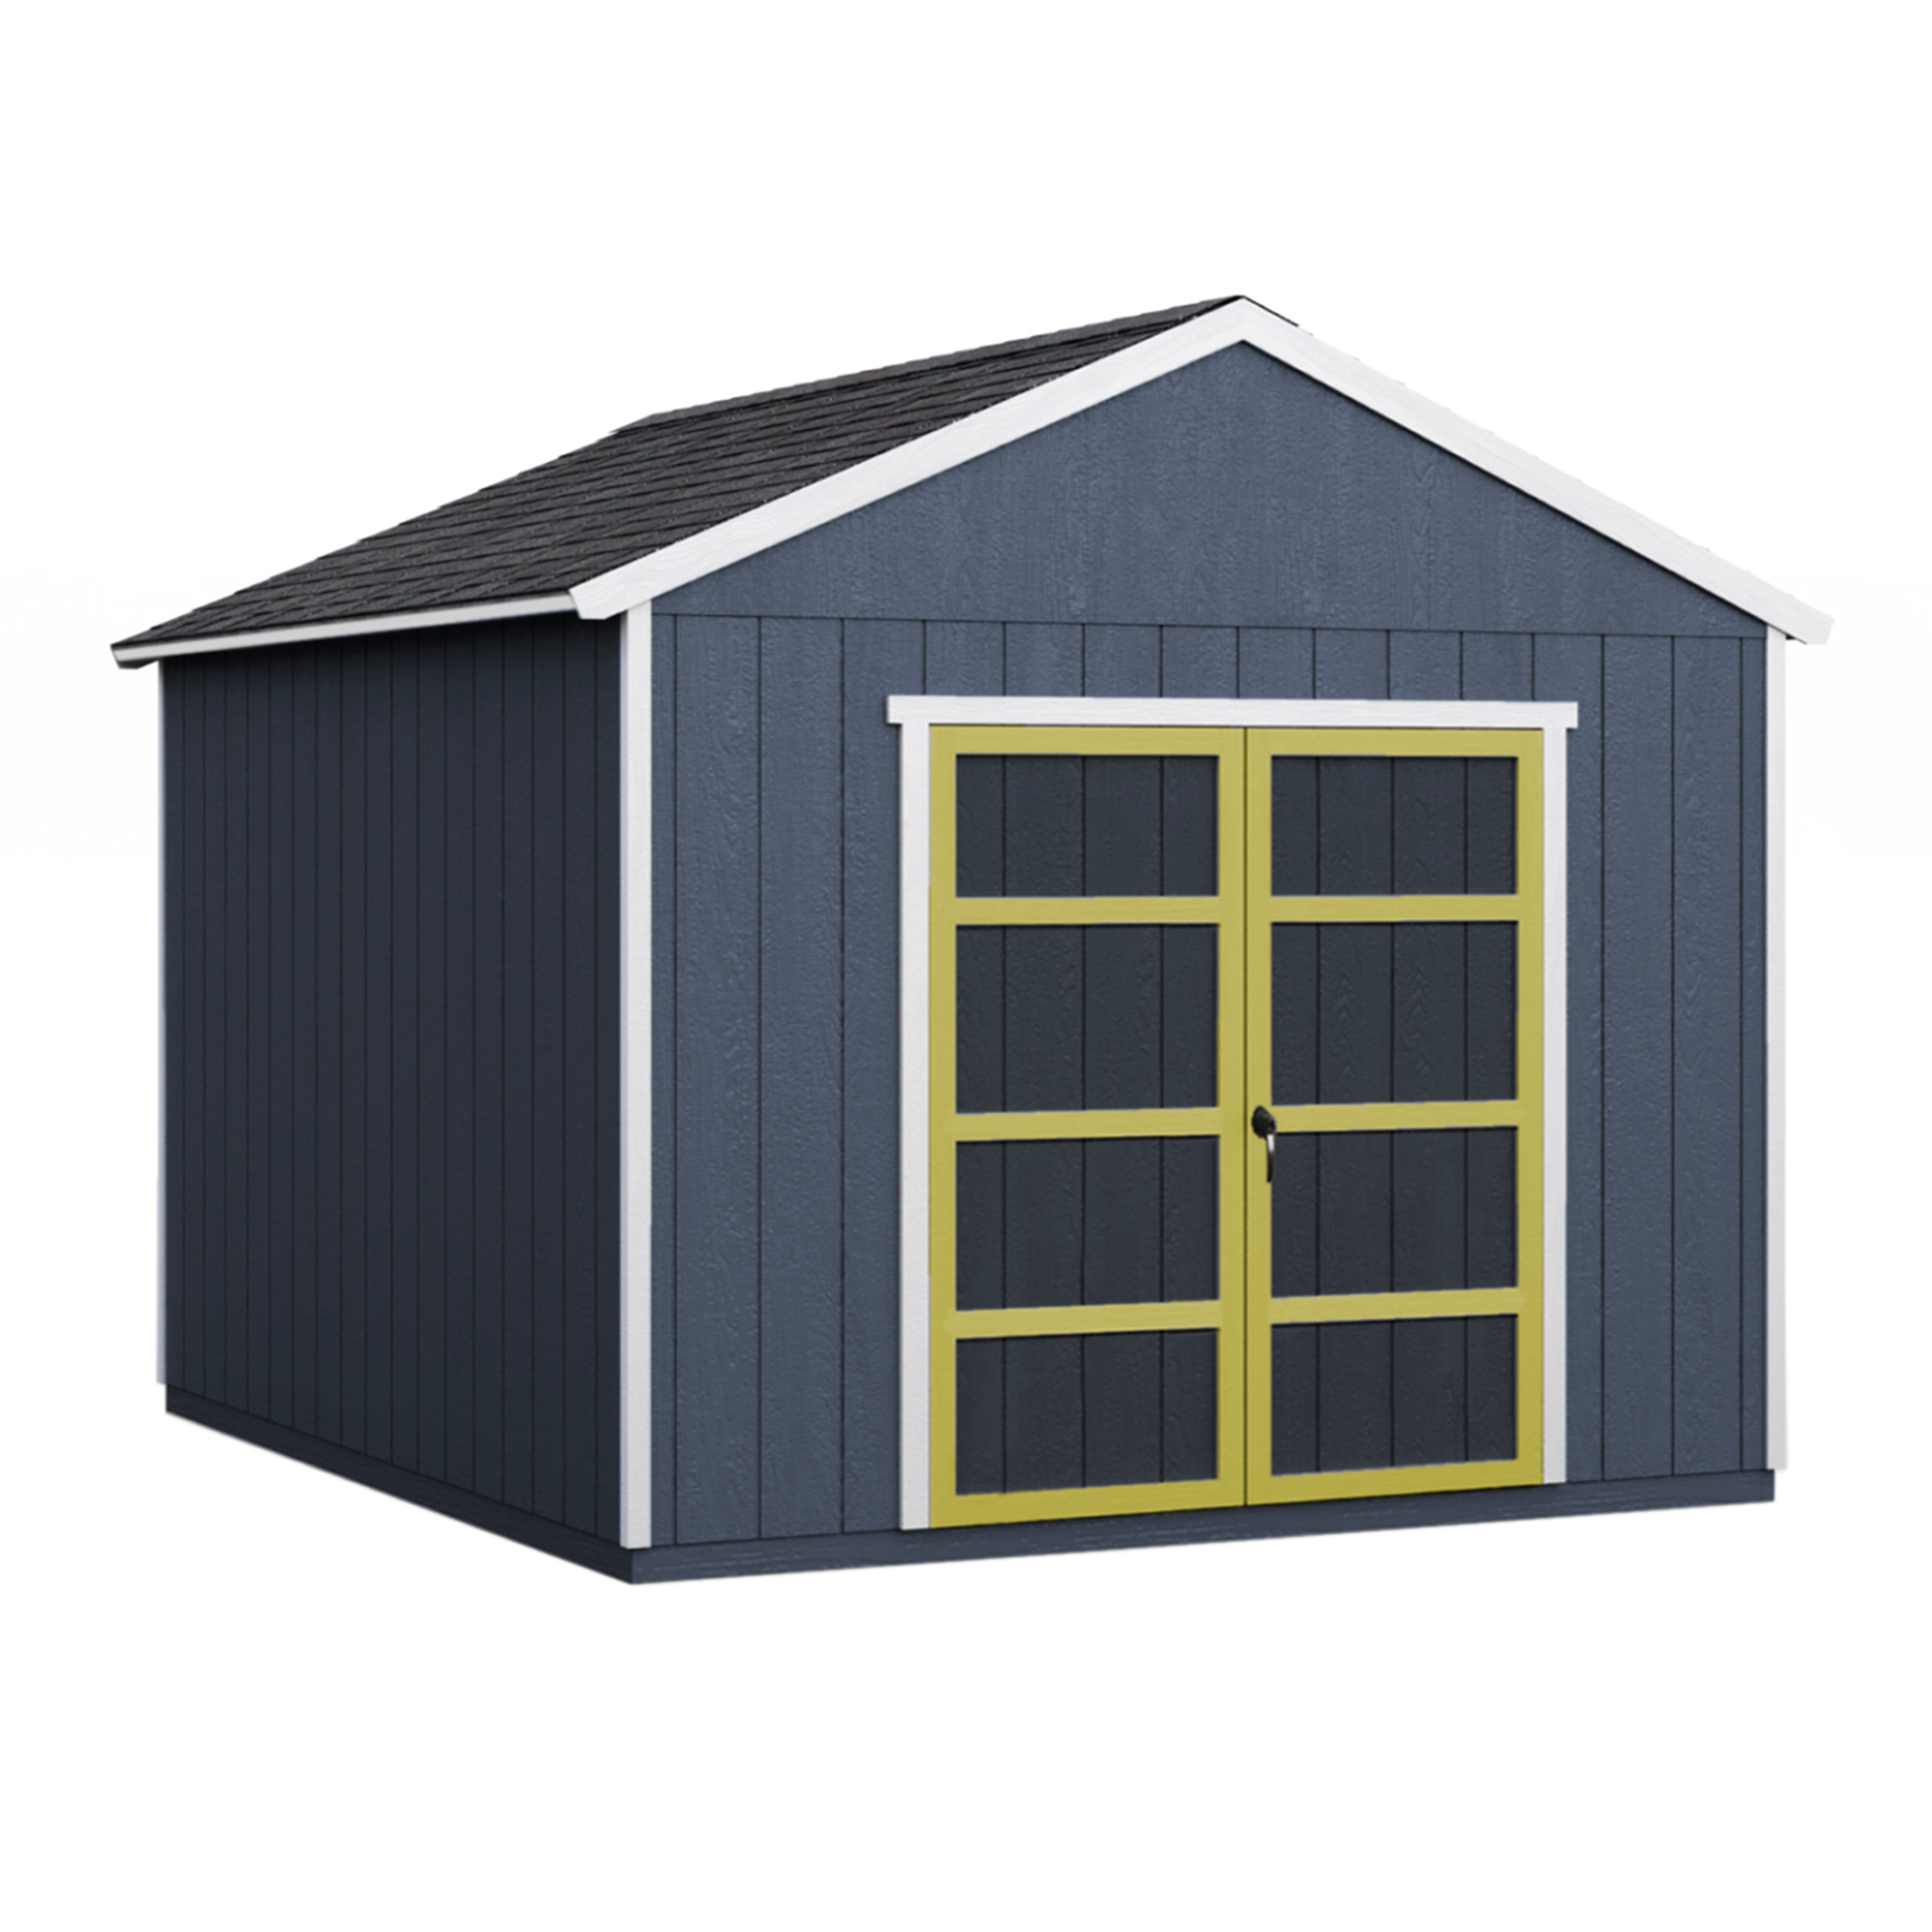 Handy Home 10x16 Rookwood Wood Storage Shed Kit (19434-4) Perfect for any outdoor setting. 